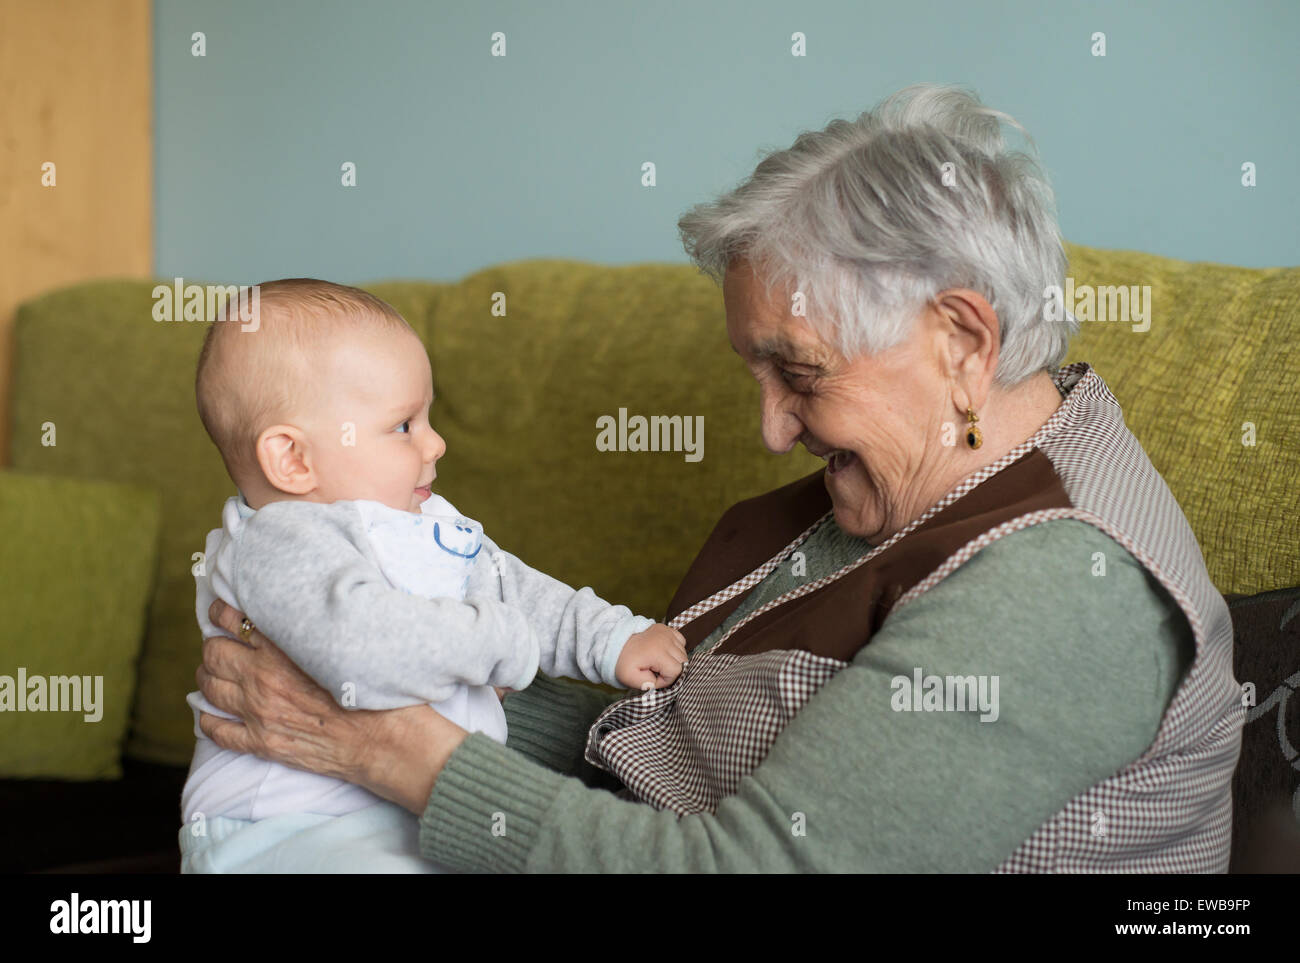 Elderly woman with a beautiful baby at home. The baby and the lady are laughing at each other. Stock Photo